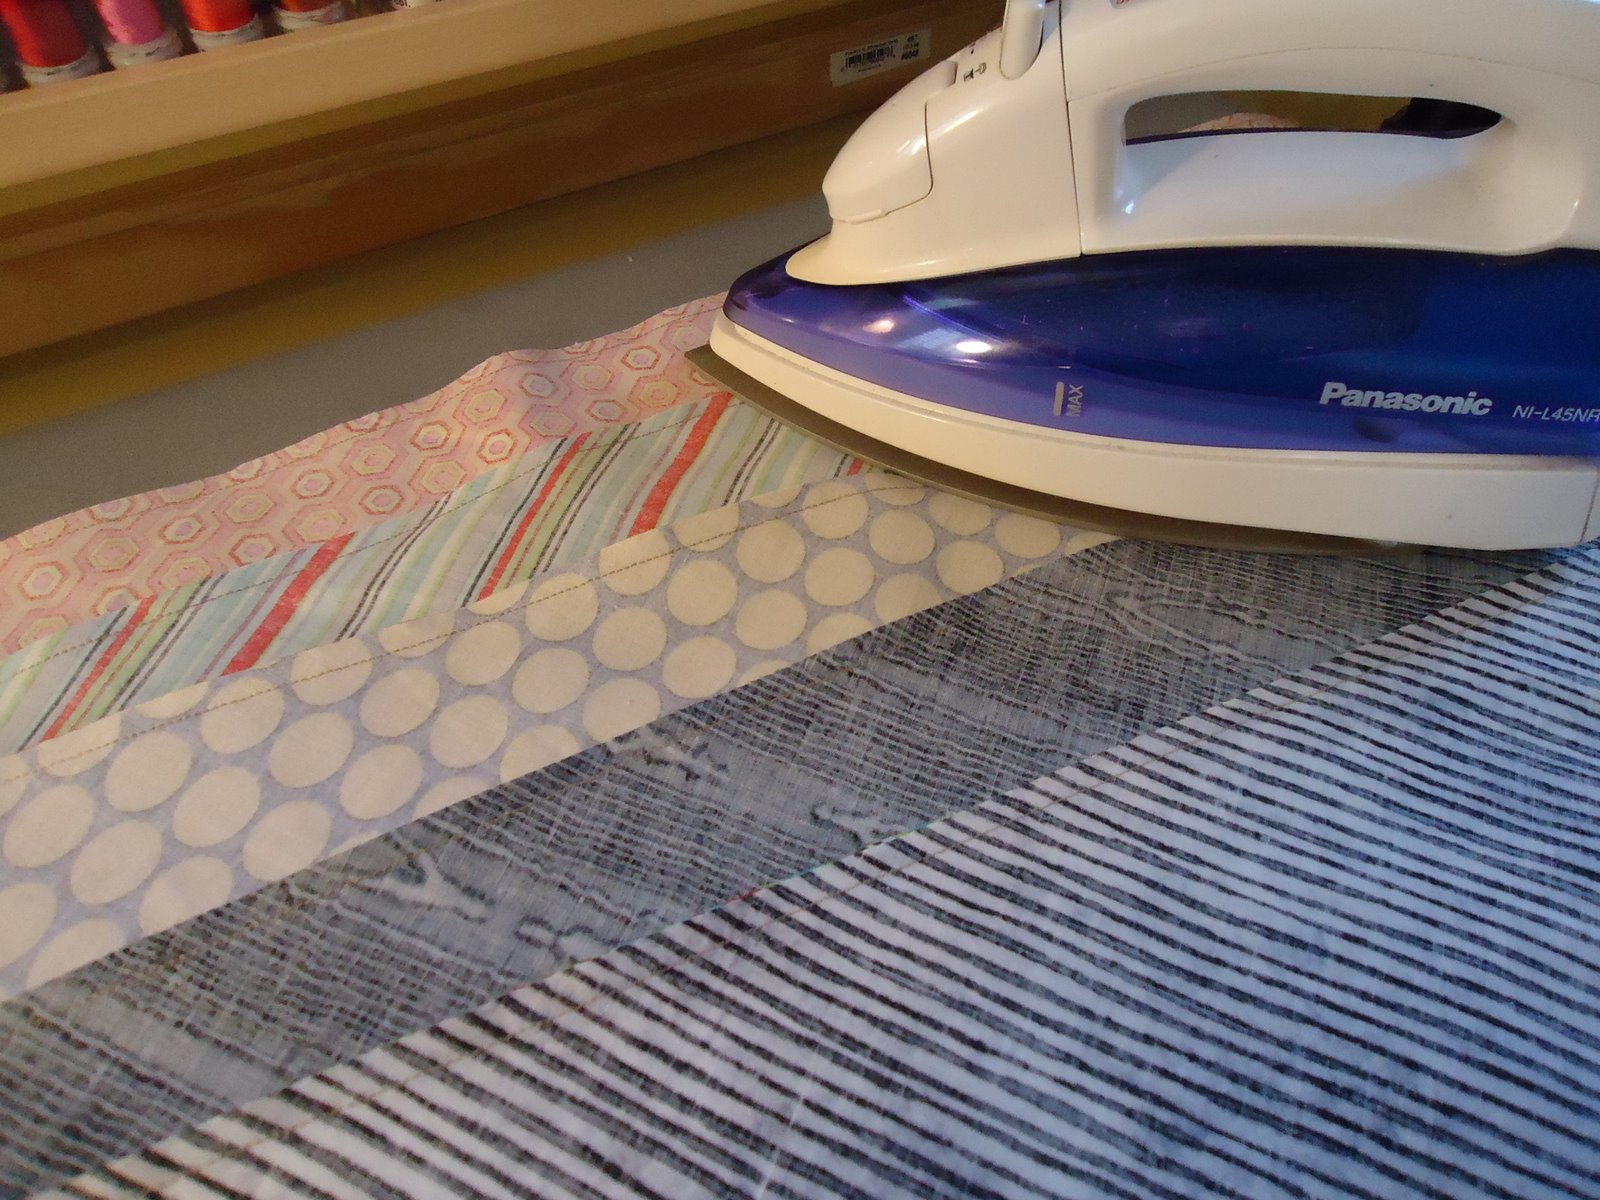 The Quilting Edge: Quilt Backs....Good Place to Experiment